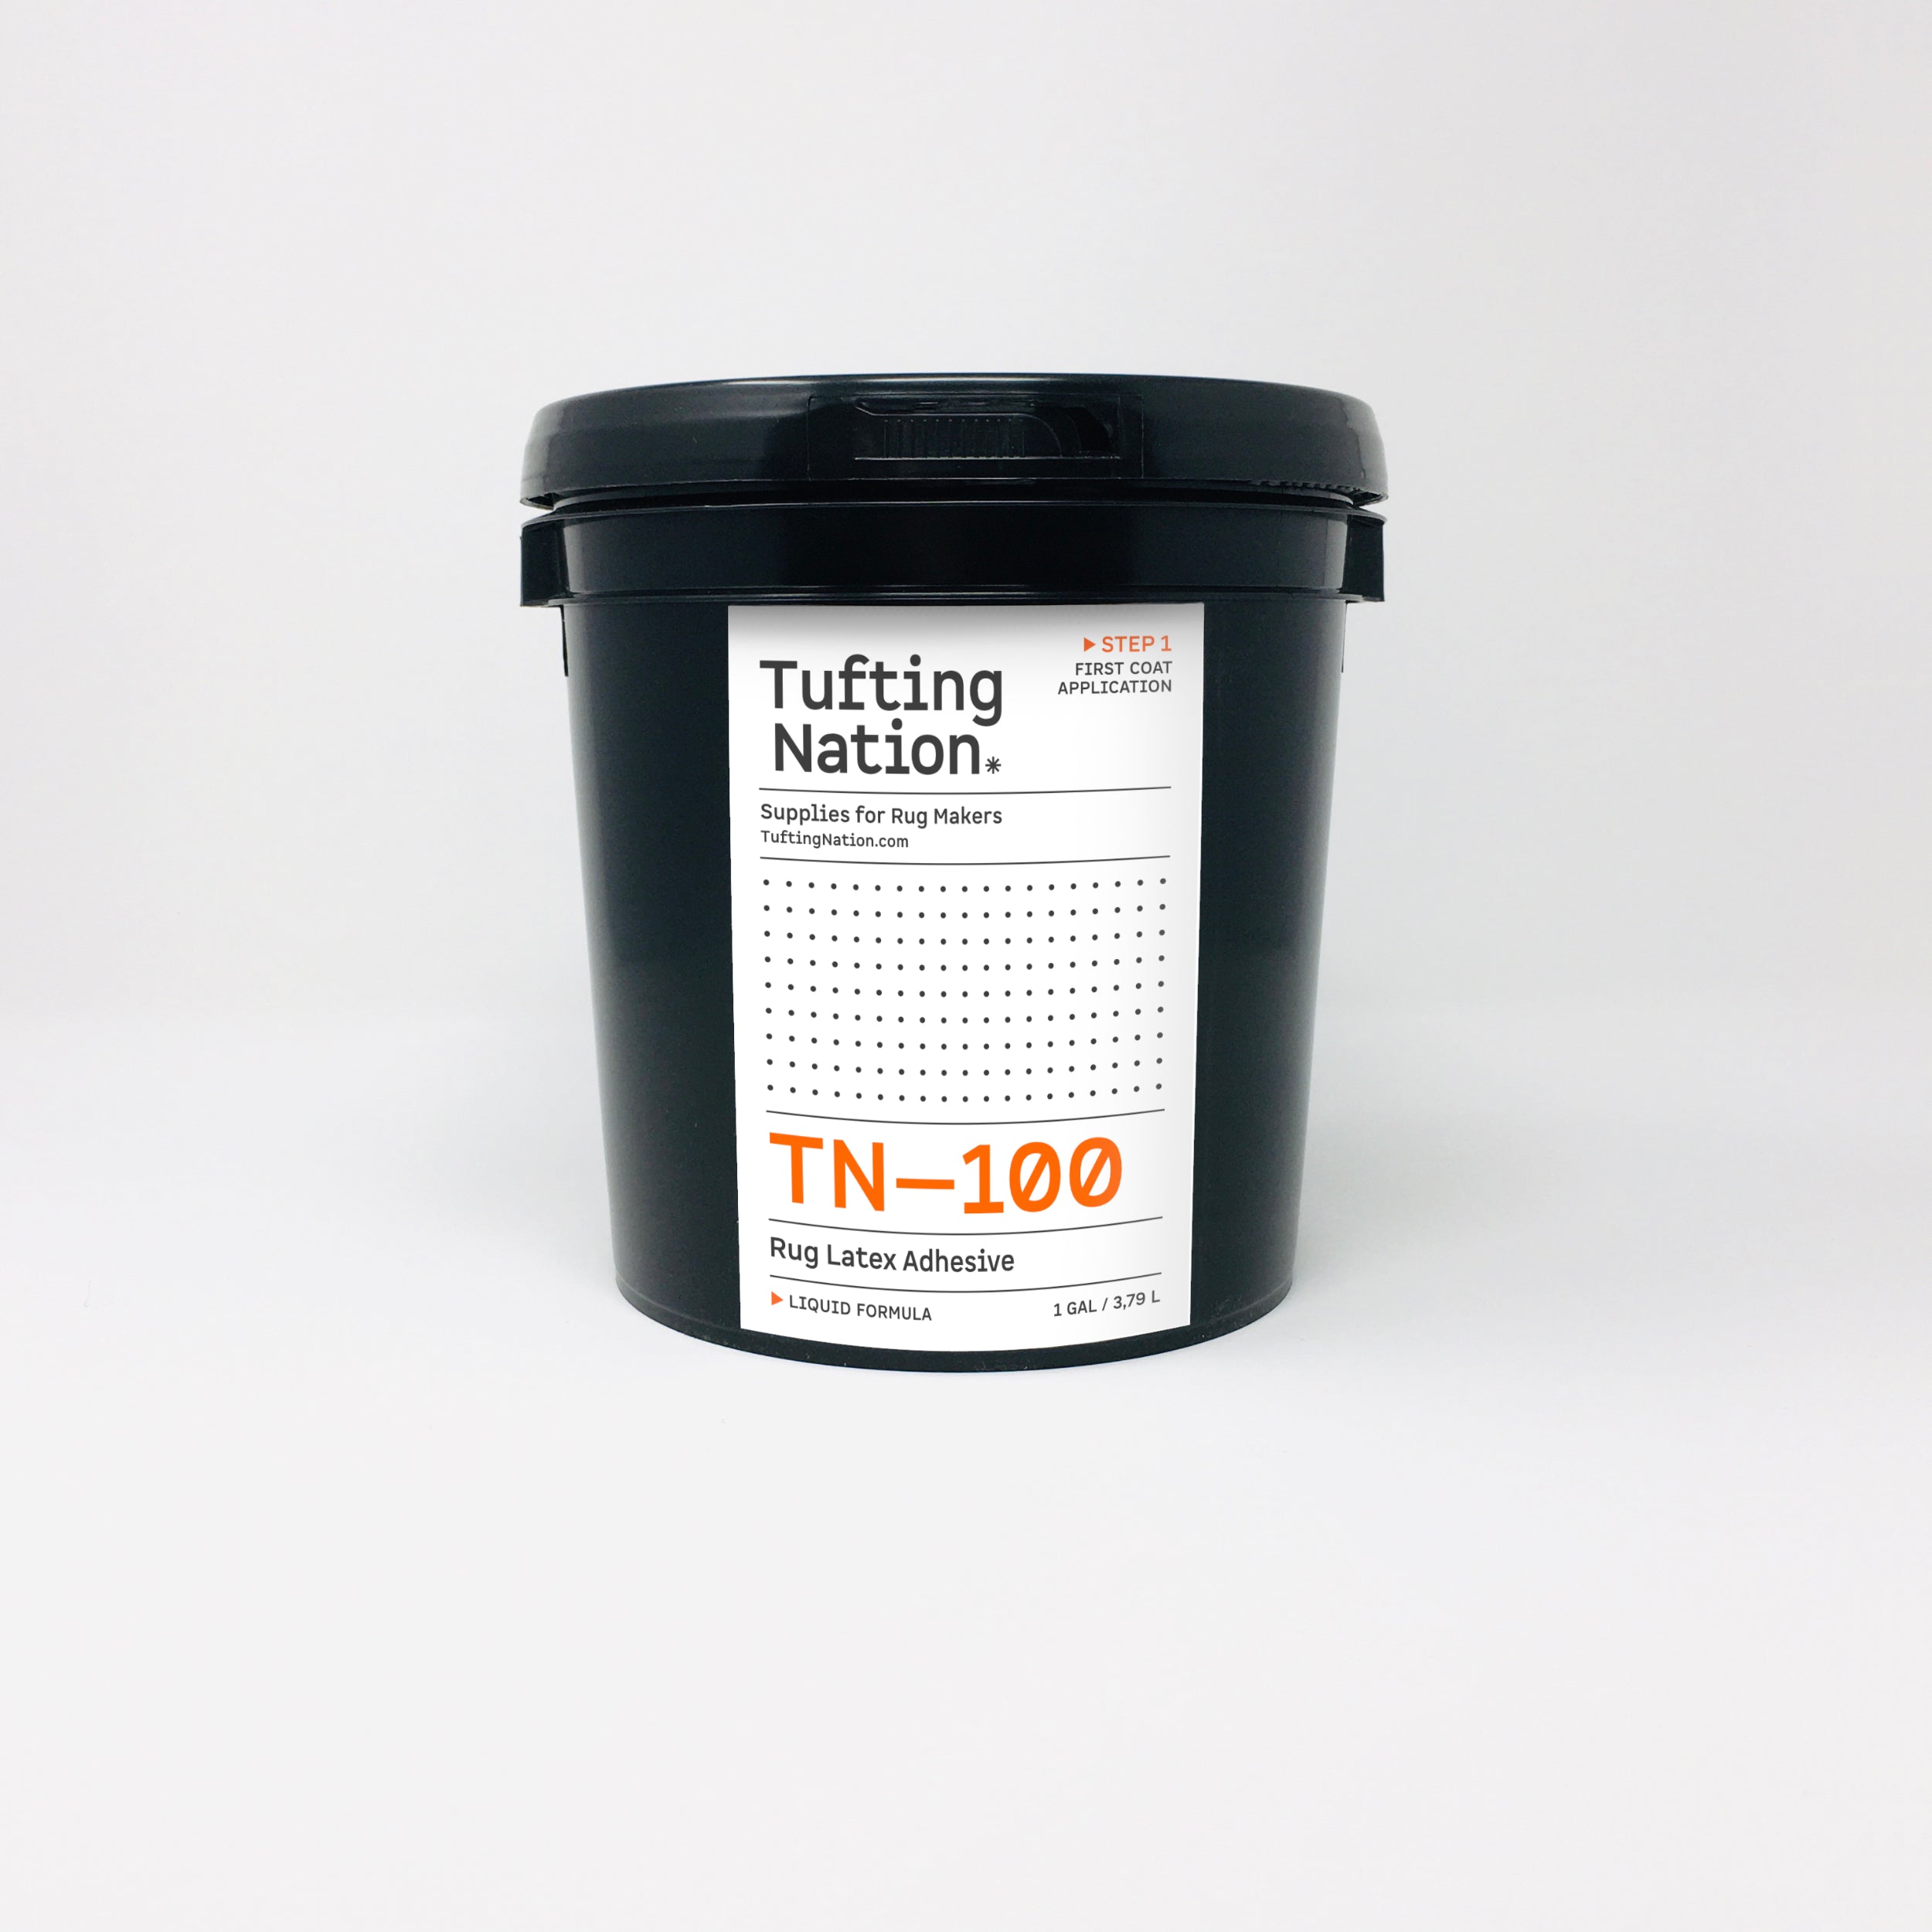 Tufting - Rug Adhesive - 5L, Shop Today. Get it Tomorrow!